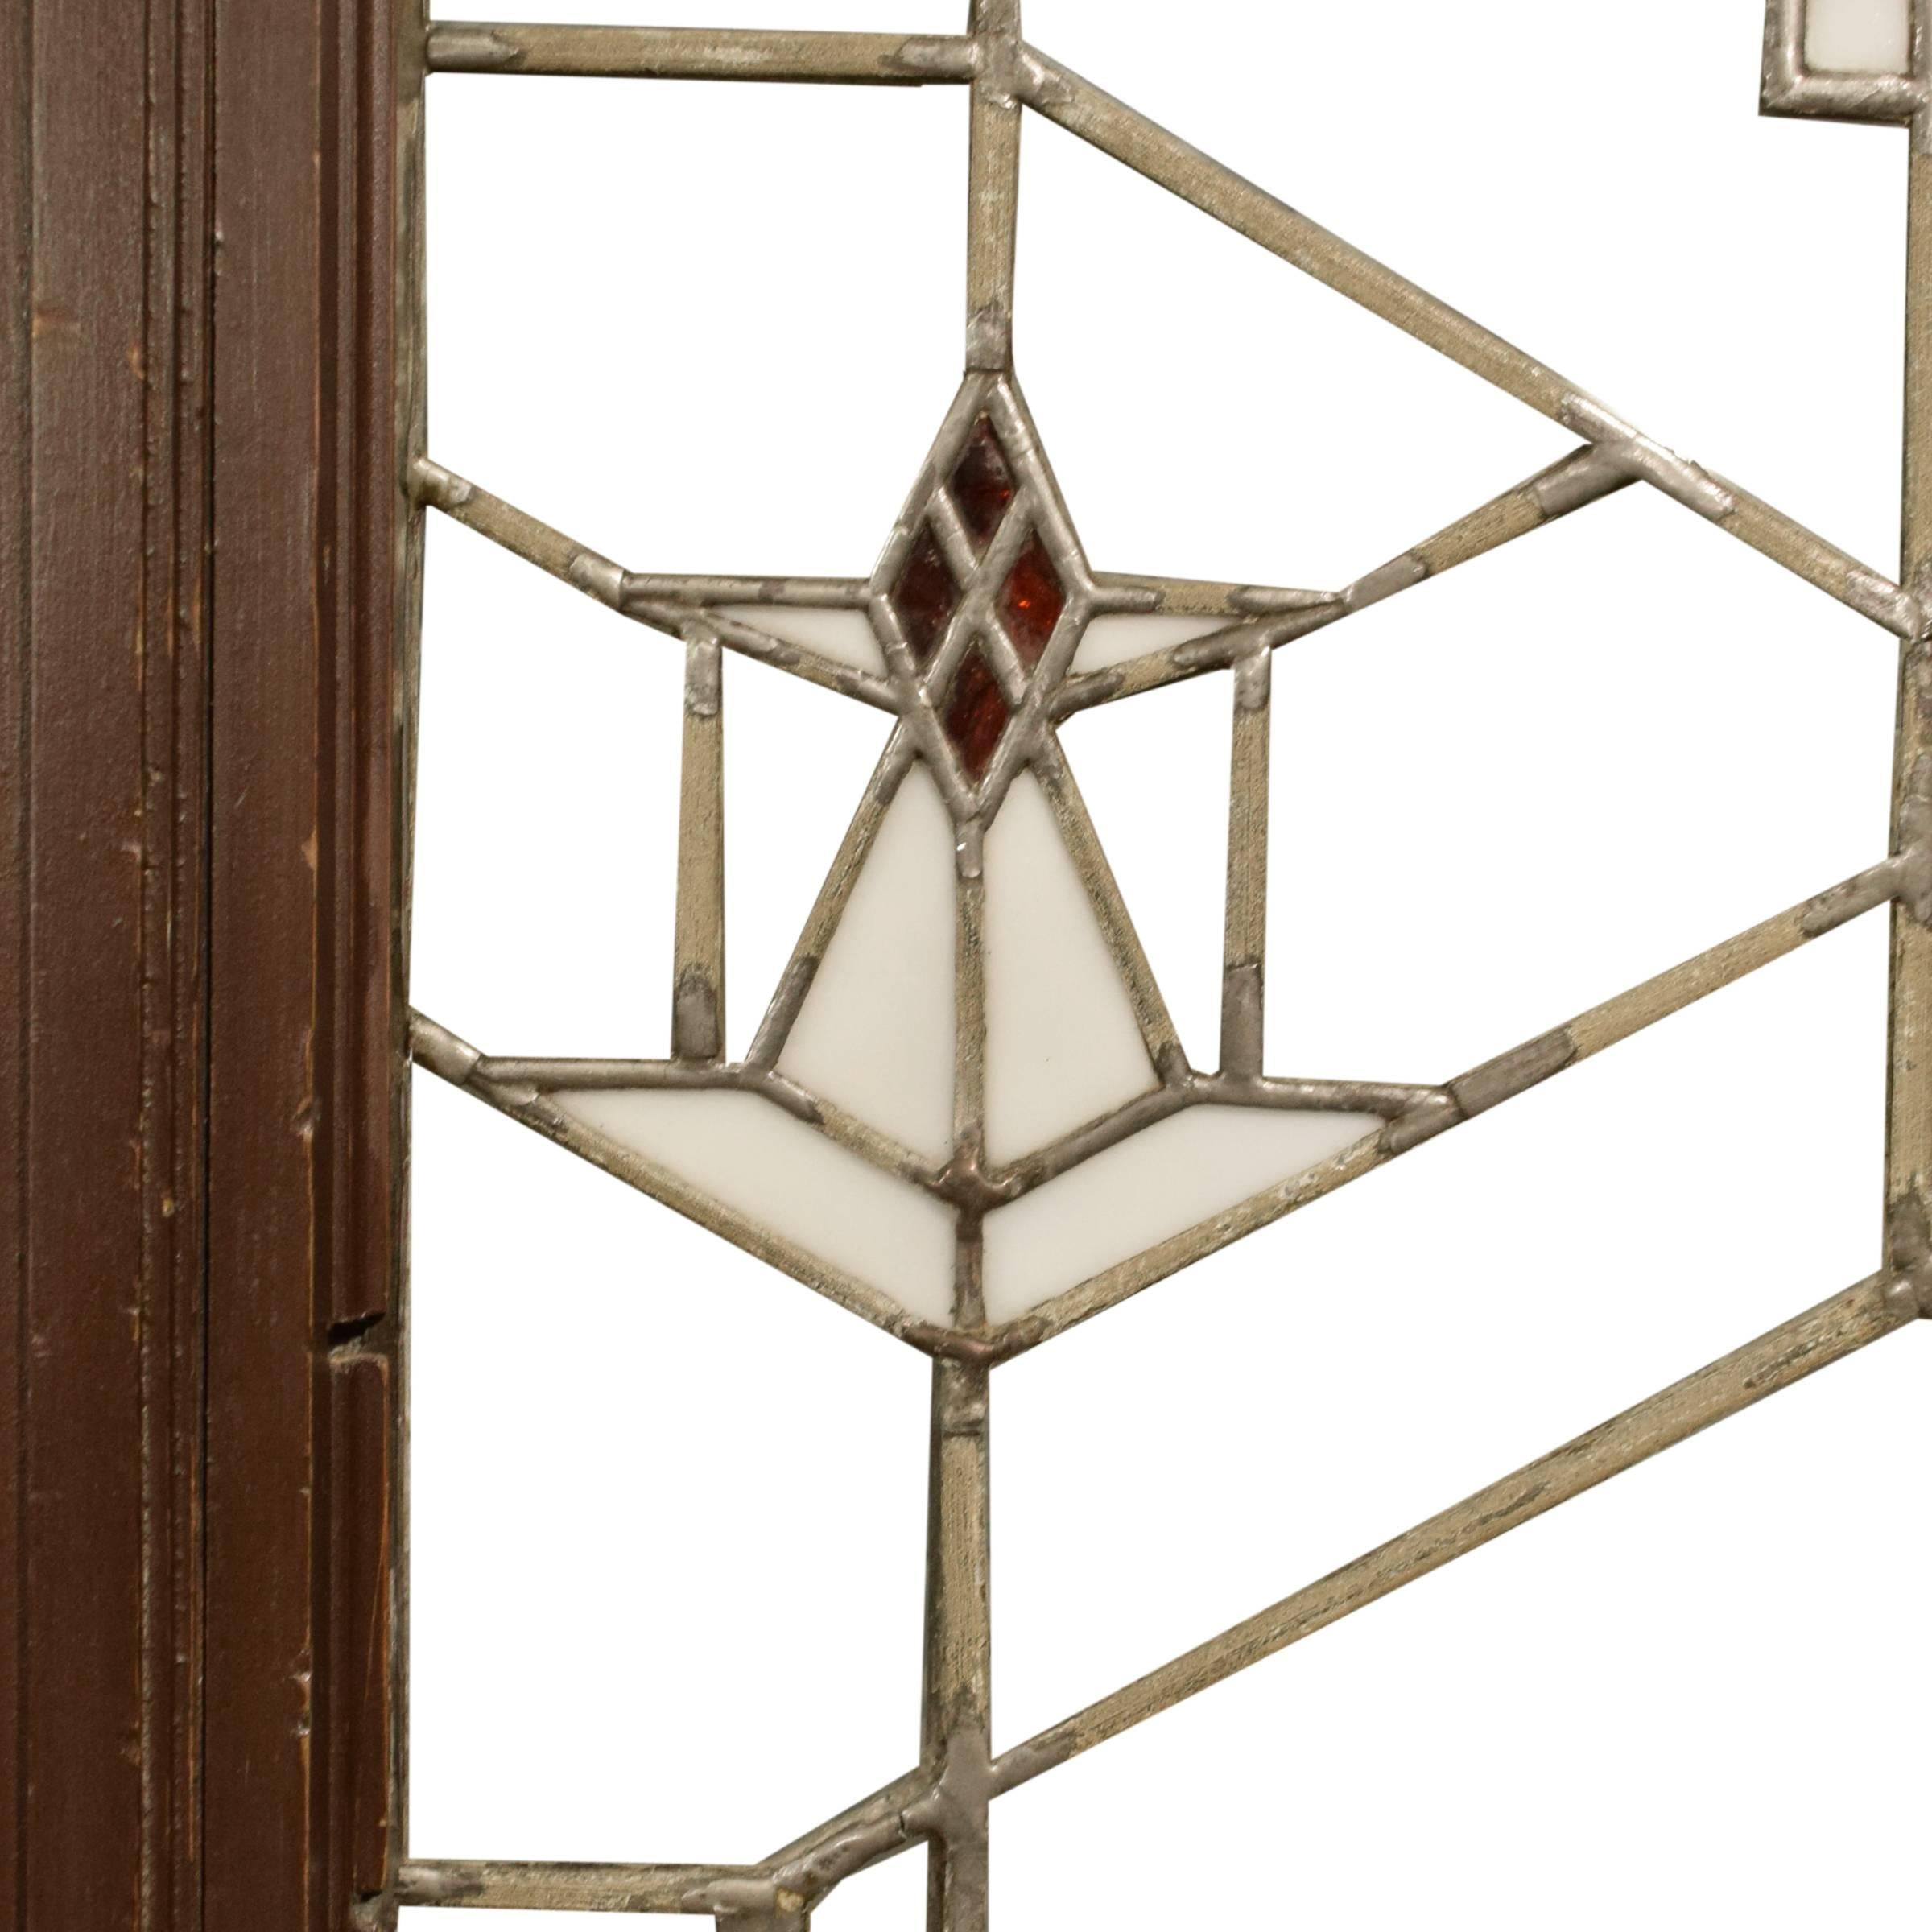 Frank Lloyd Wright designed door from the Bradley house in Kankakee, Illinois, 1900. The Bradley house is the first completed Prairie School residence designed by Wright. The home includes many elements that would become hallmarks of Wright's